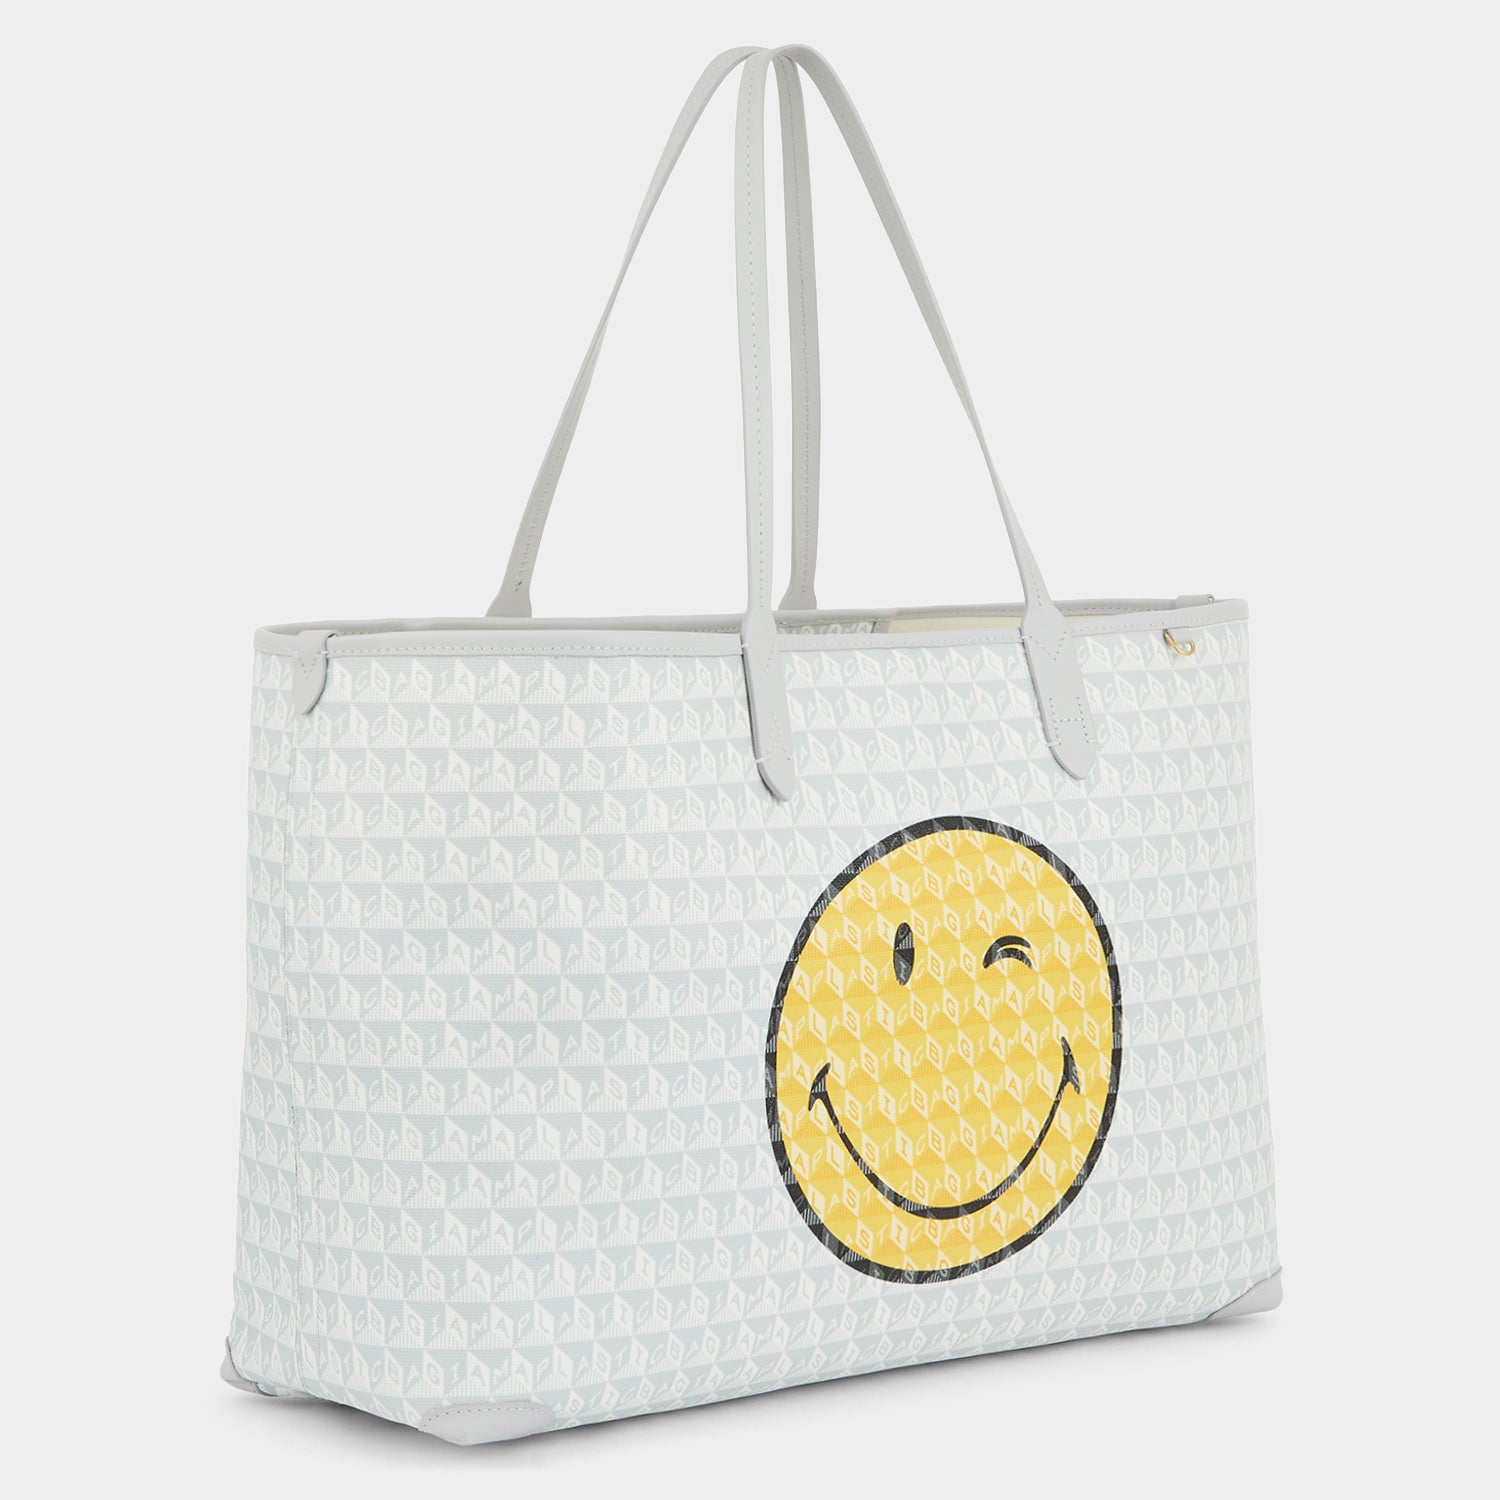 「I AM A Plastic Bag」 ウィンク トート -

                  
                    Recycled Coated Canvas in Frost -
                  

                  Anya Hindmarch JP
